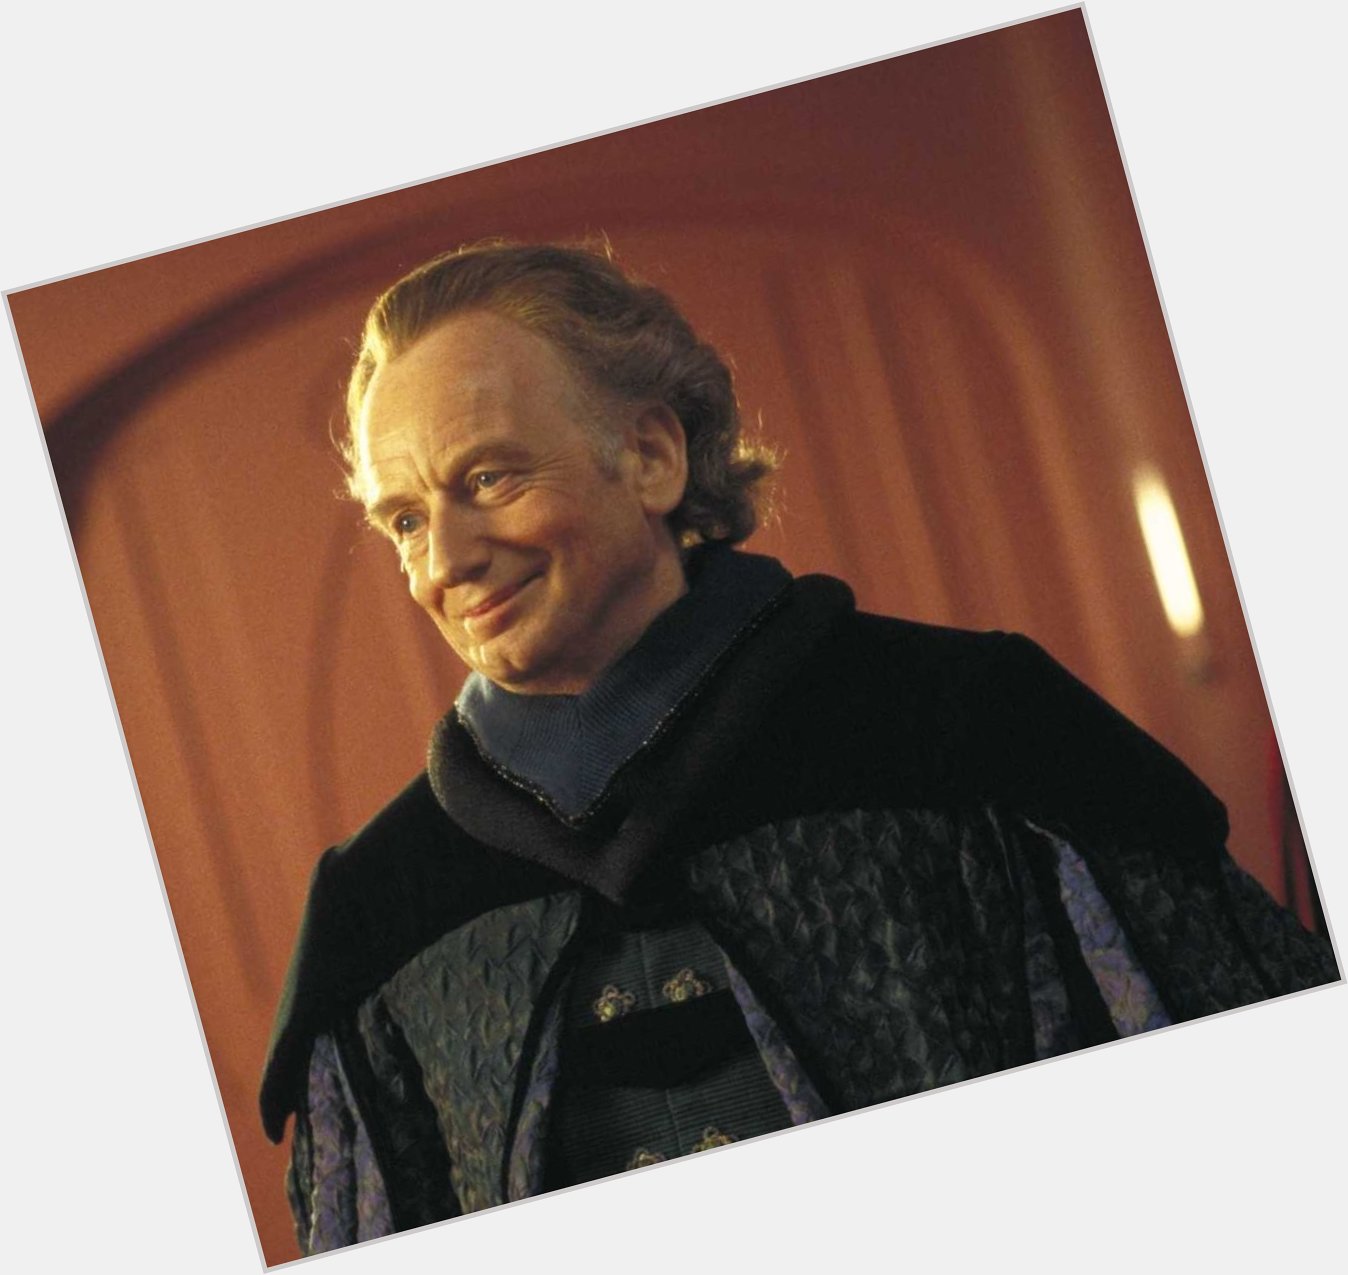 Happy Birthday to my number one Classical trained Actor Ian McDiarmid hope you had a good one!  